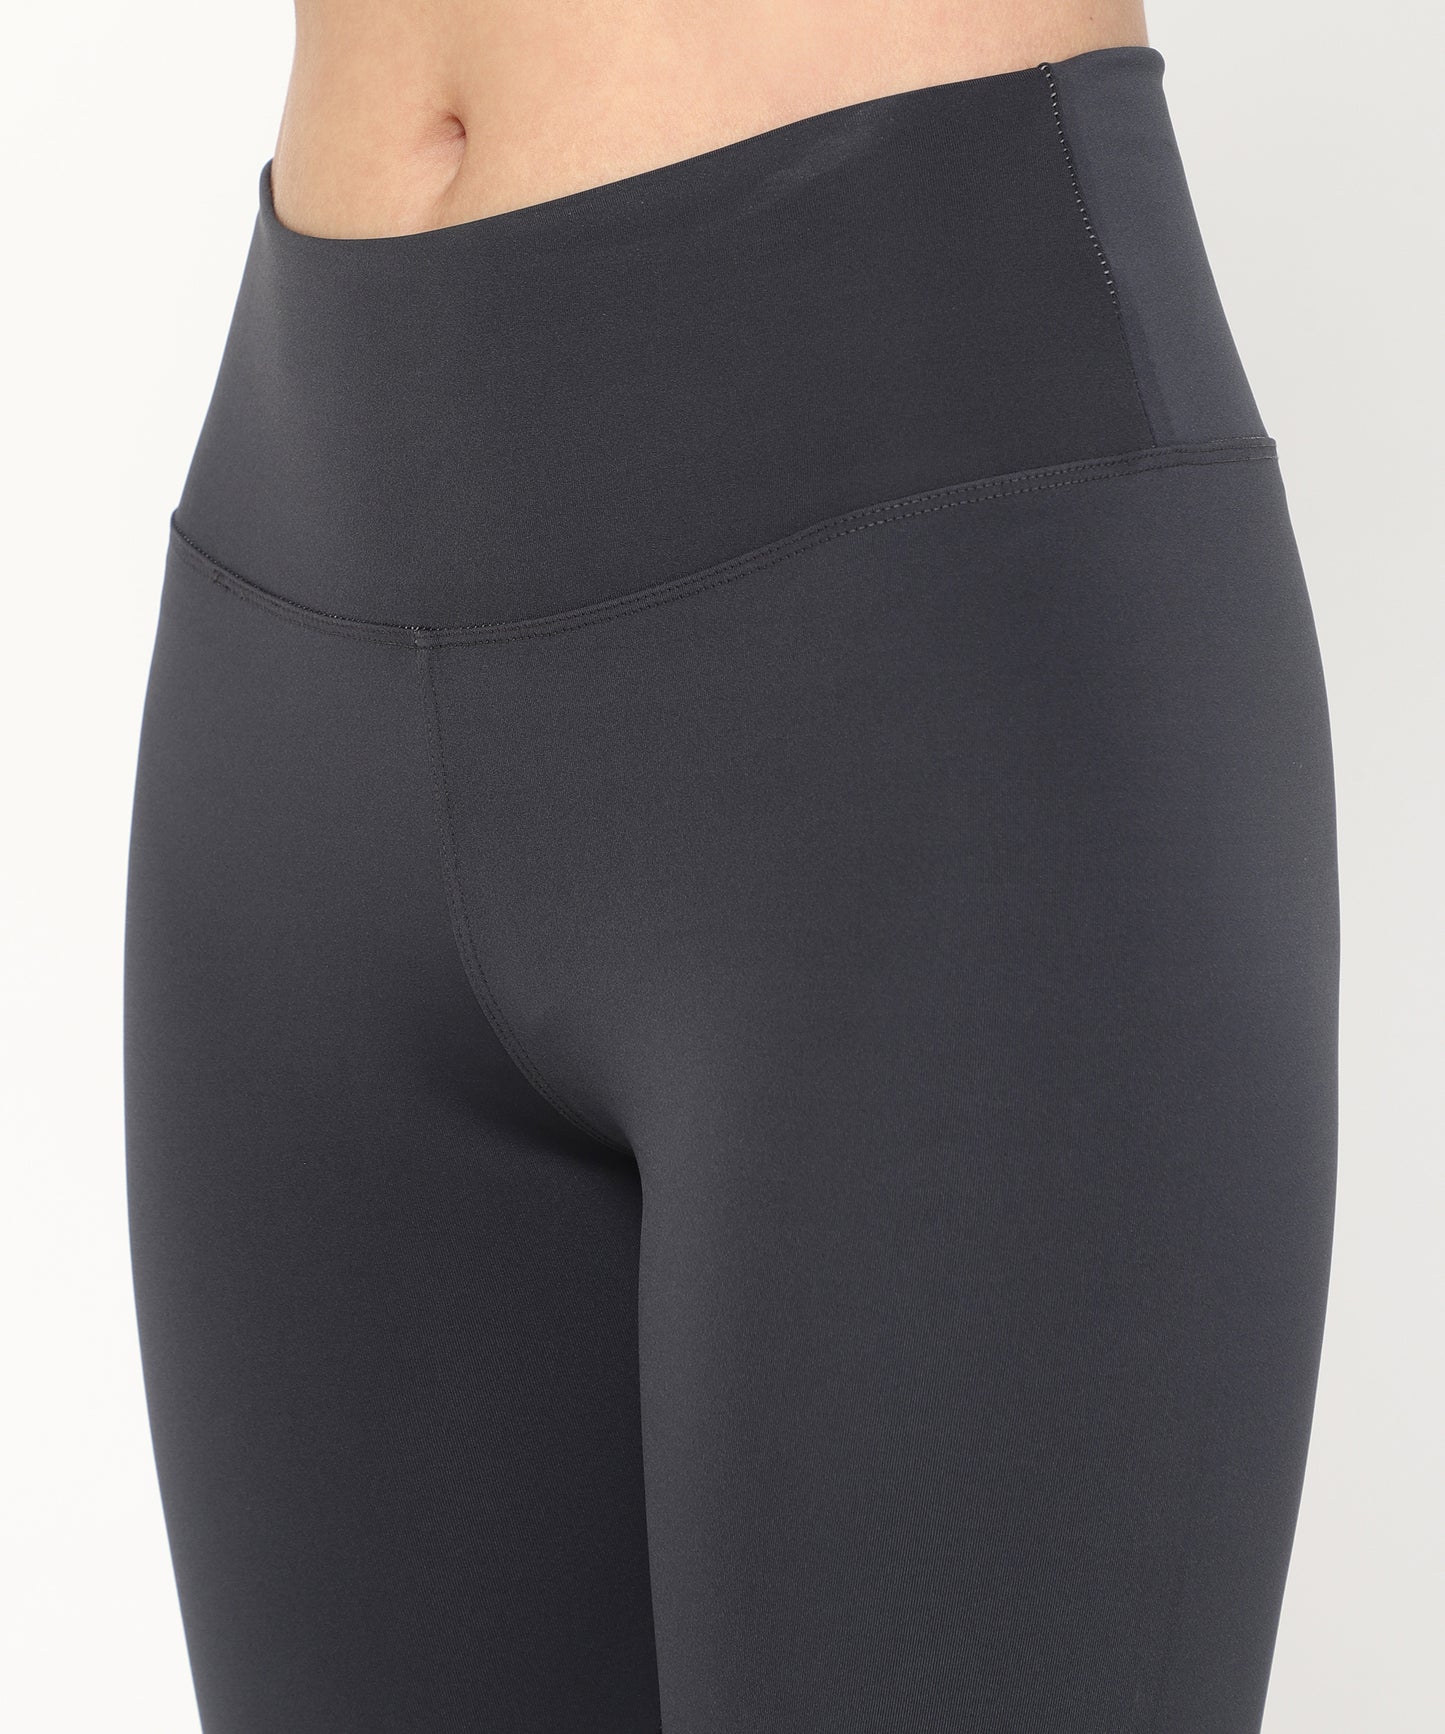 The Ultimate Stretchable Jeggings-Super-High Waisted Elastic Jeggings Yogapants Ankle Length(Grey)